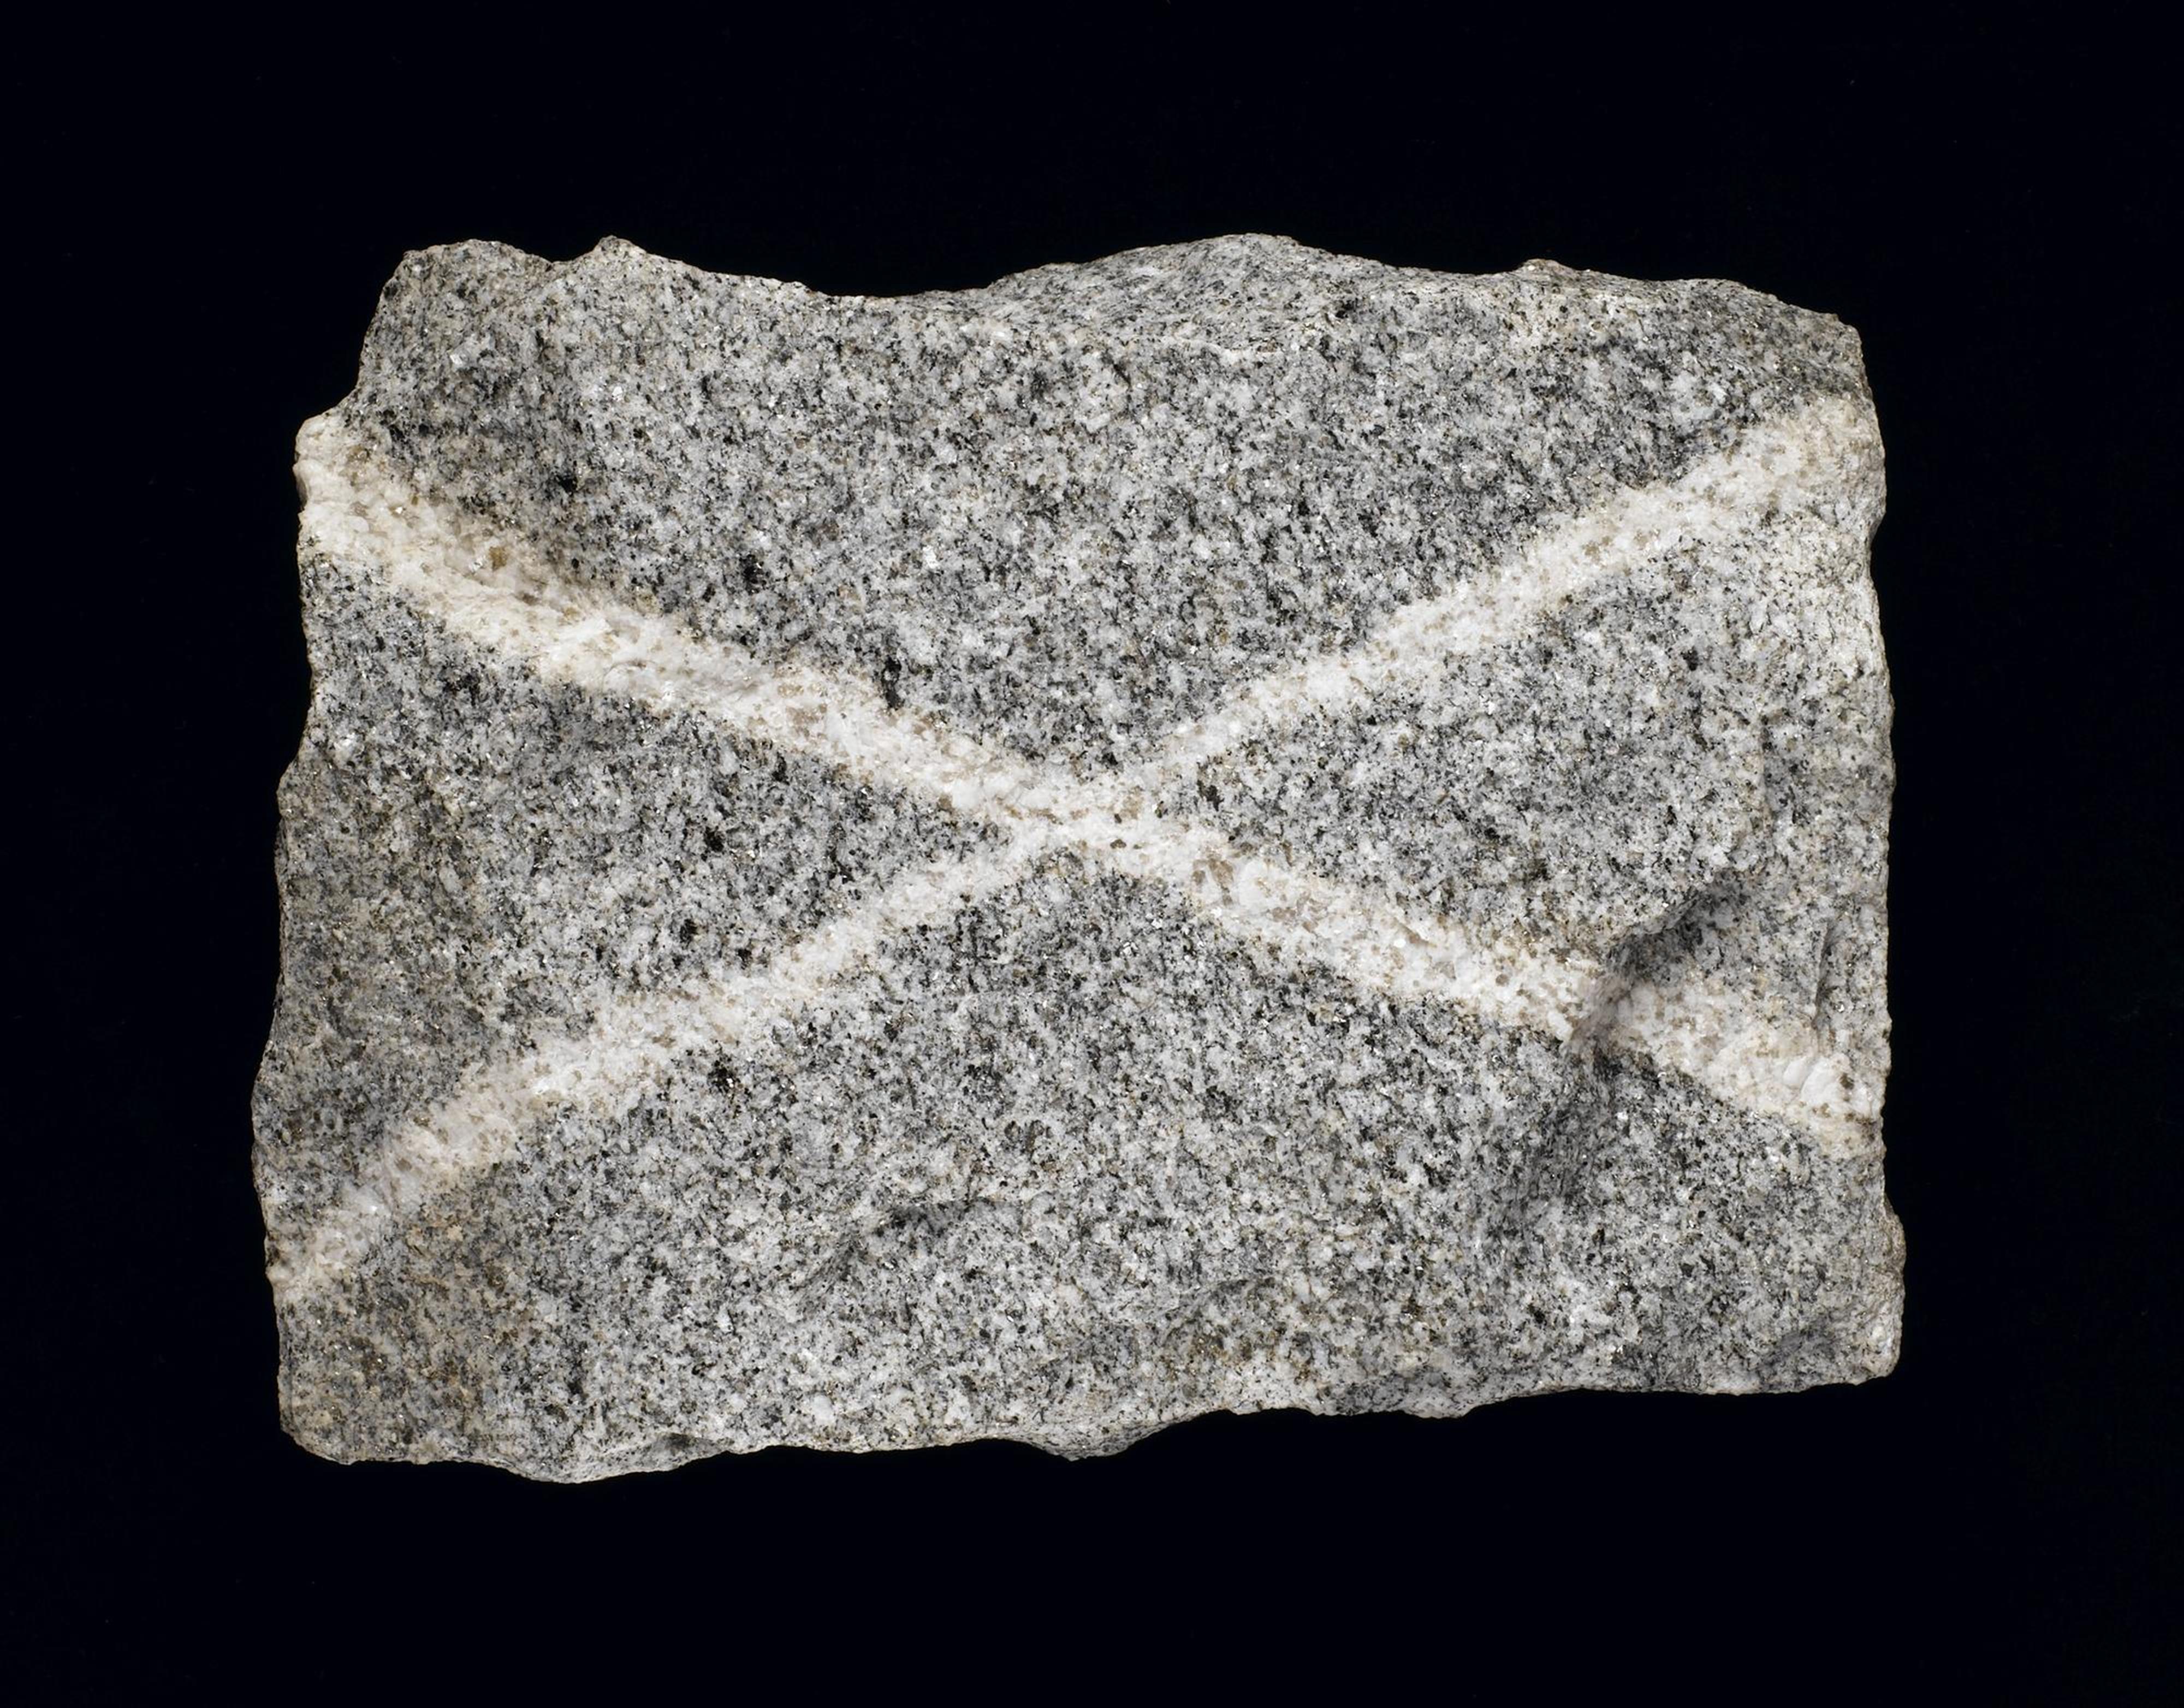 Grey granite with quartz veins, forming a saltire, from Persley Quarry, Aberdeen, Scotland. On display in the Scotland: A Changing Nation gallery at the National Museum of Scotland.